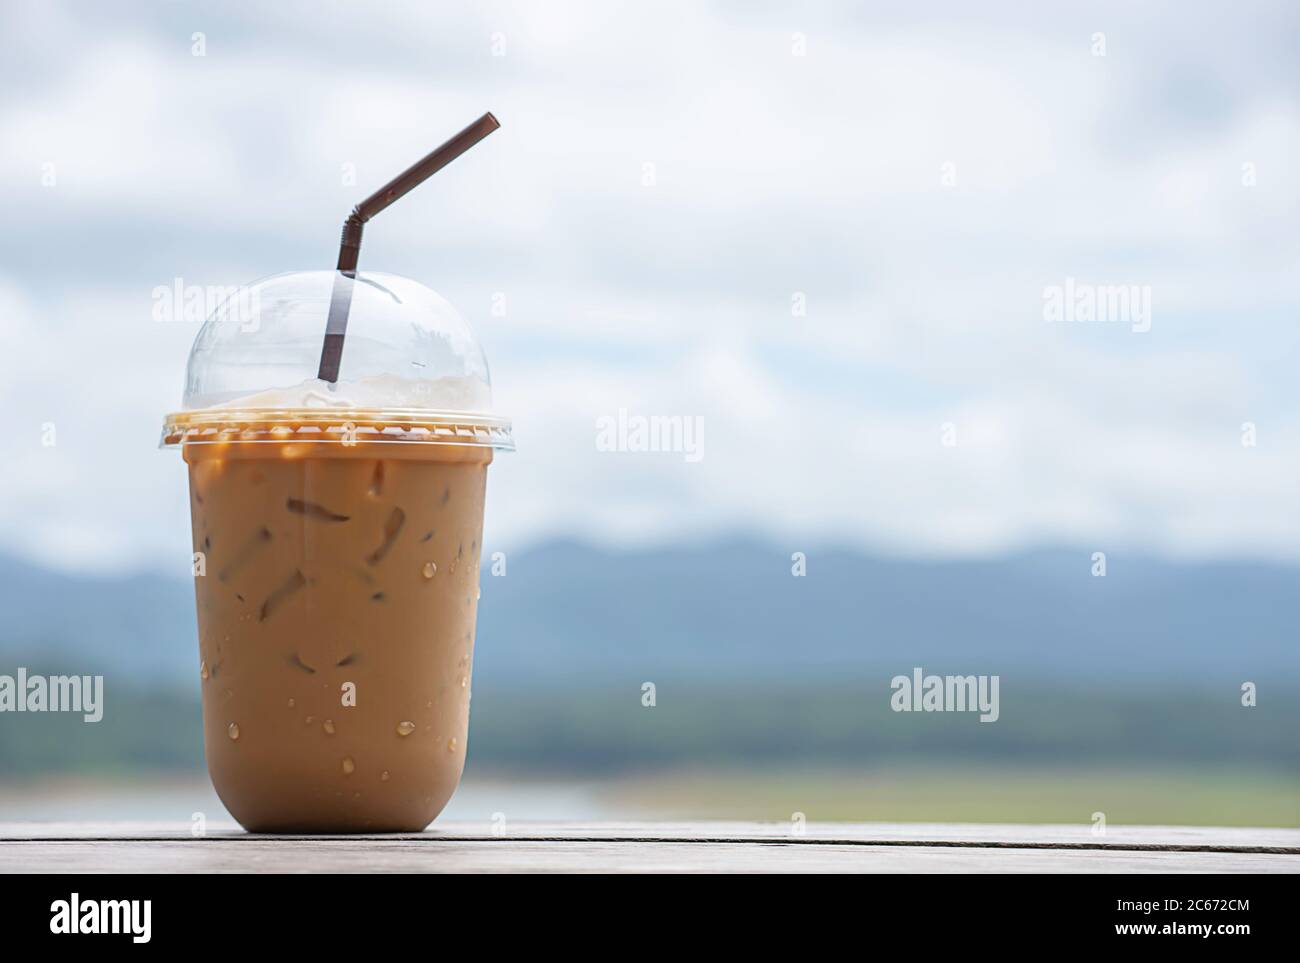 https://c8.alamy.com/comp/2C672CM/glass-of-cold-espresso-coffee-on-the-table-background-blurry-views-sky-water-and-mountain-2C672CM.jpg